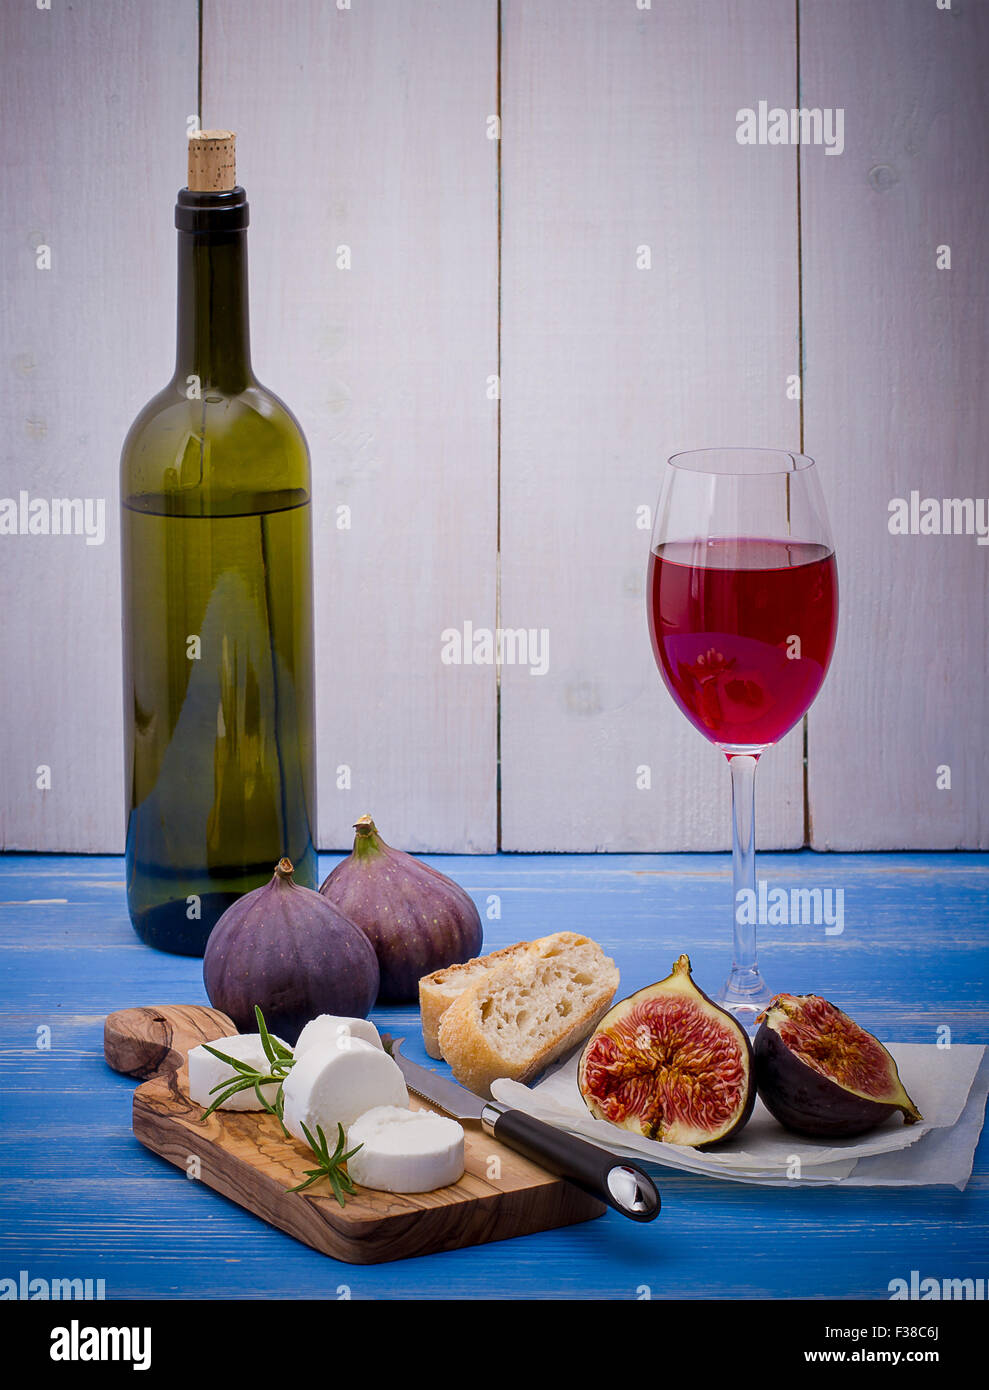 Goat cheese with ripe figs and wine on blue background Stock Photo